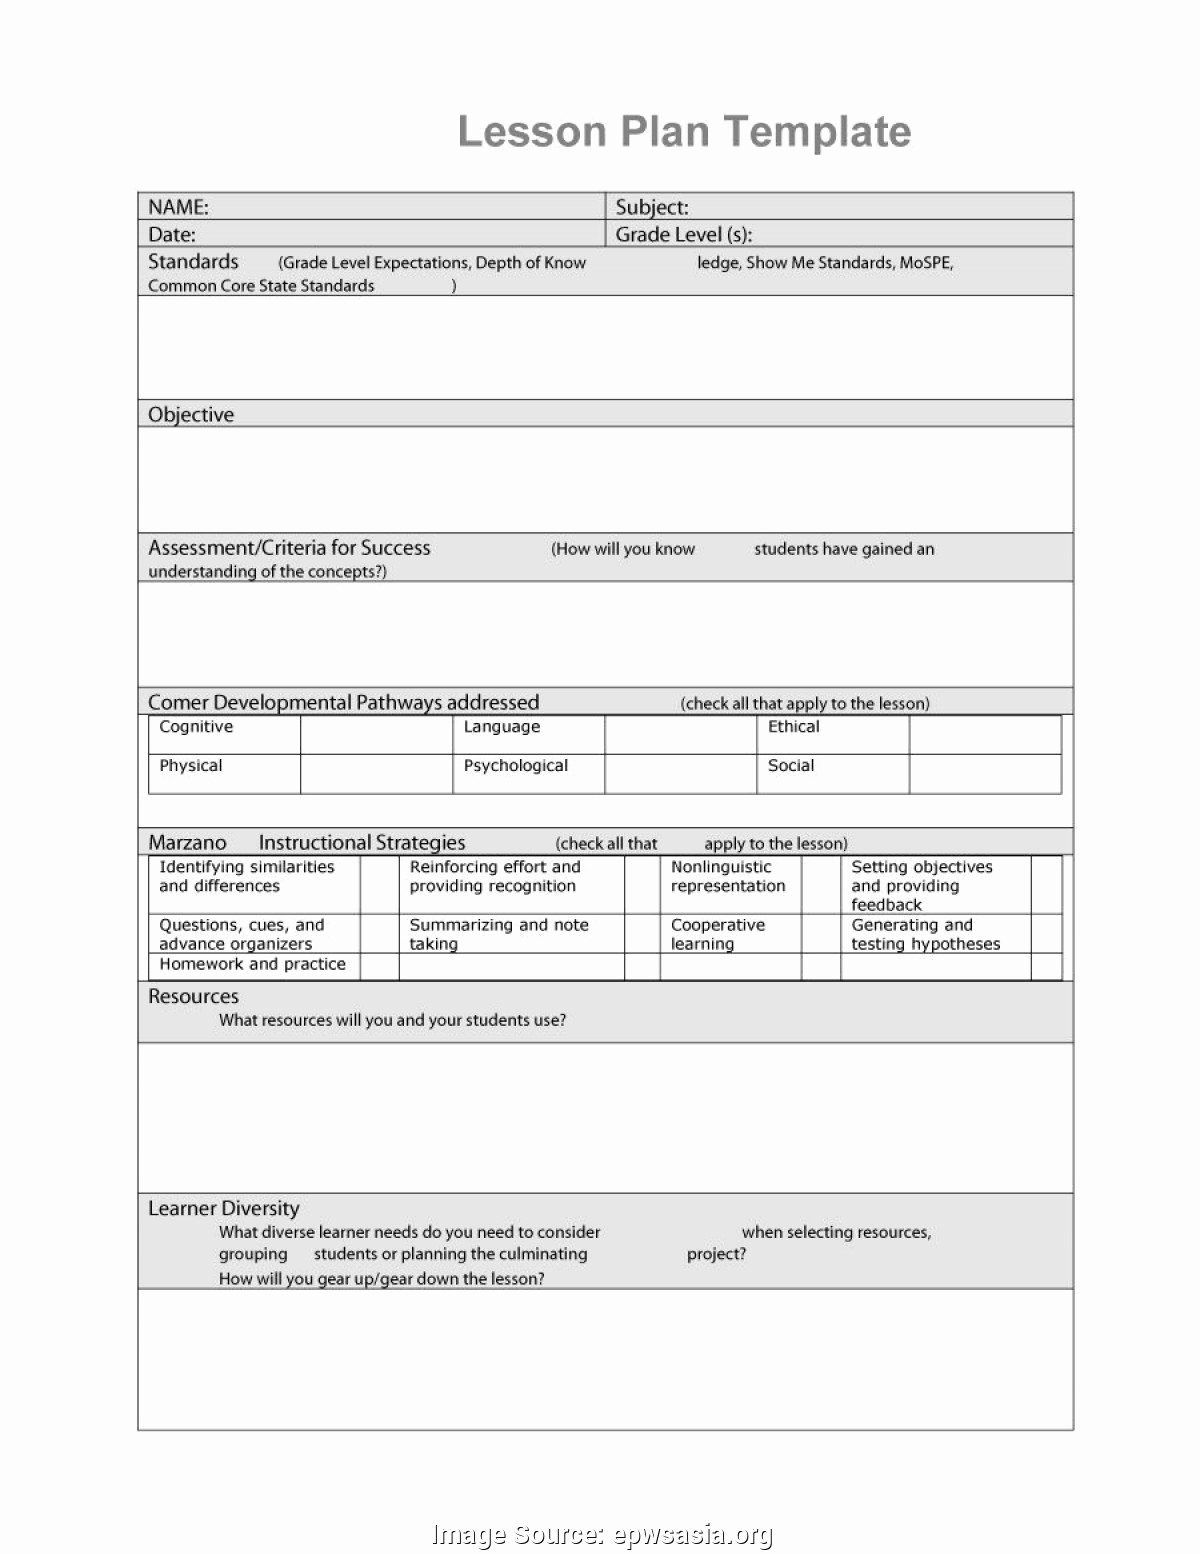 Marzano Lesson Plan Template Best Of Unusual Lesson Plan Template Marzano Marzano Lesson Plan